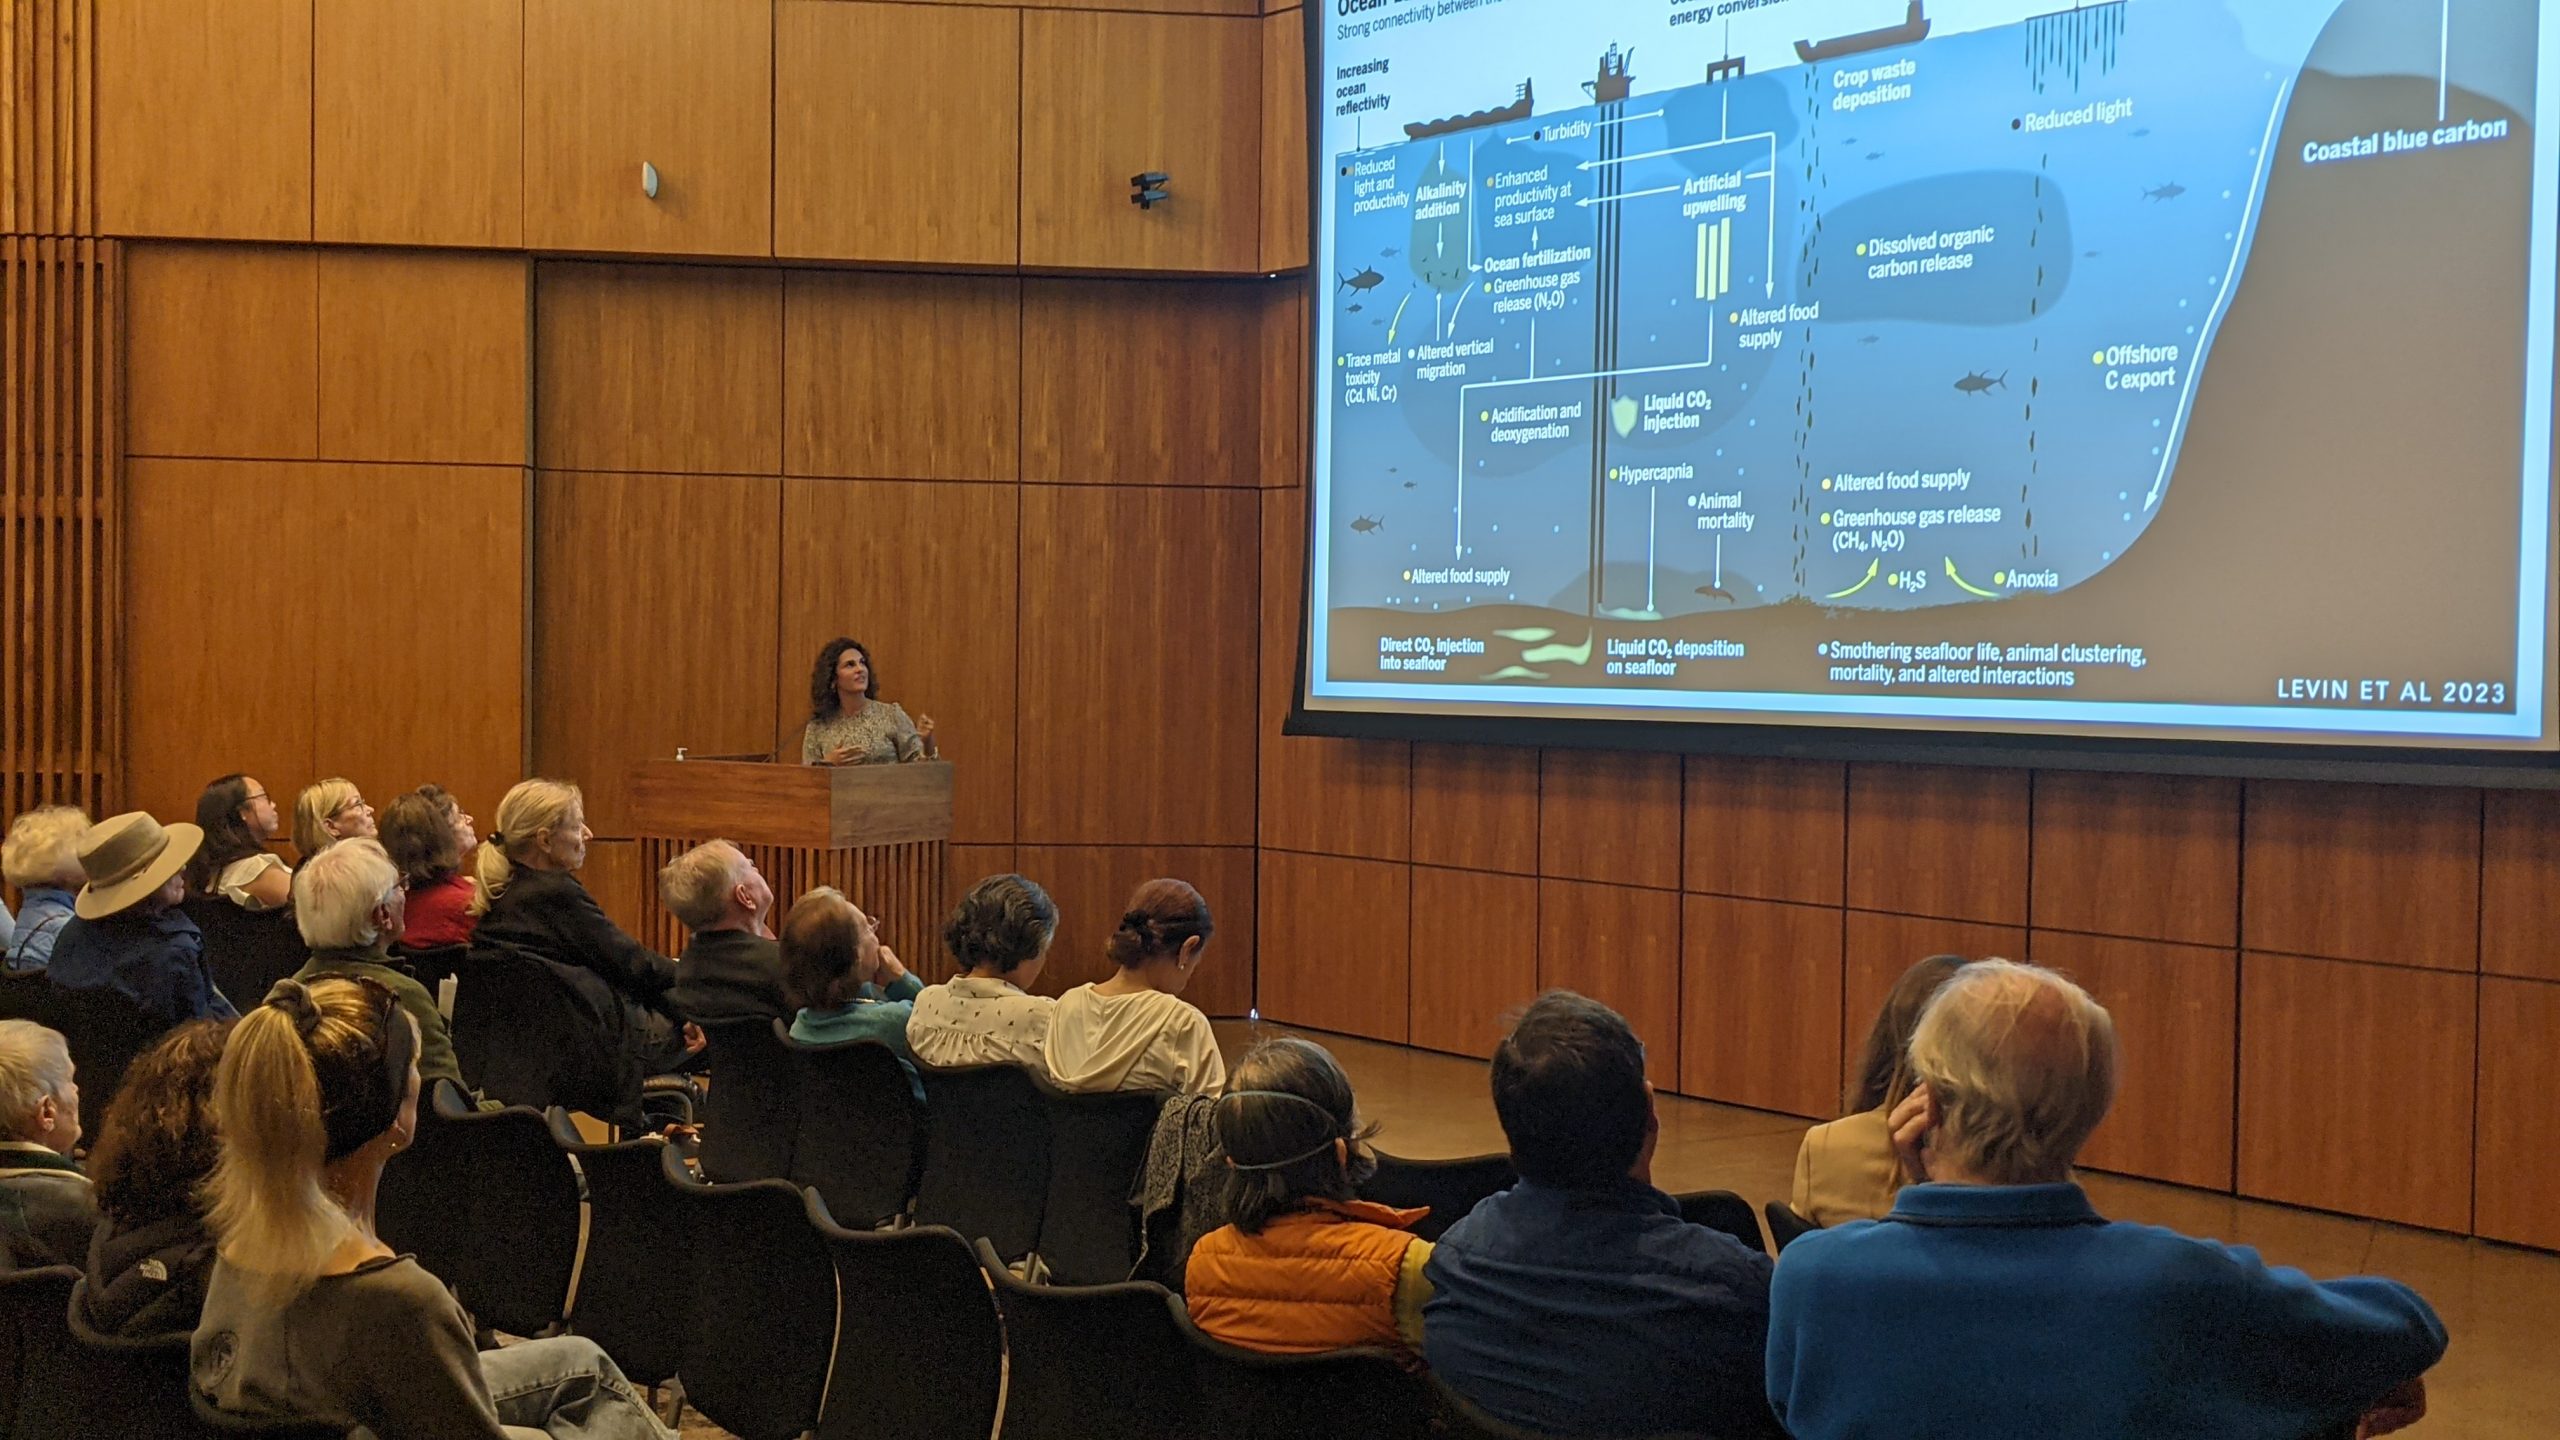 In front of crowd in the foreground, a woman (Dr. Diva Amon) presents in a lecture hall. She stands to the left of a projector screen featuring a diagram of the deep ocean.